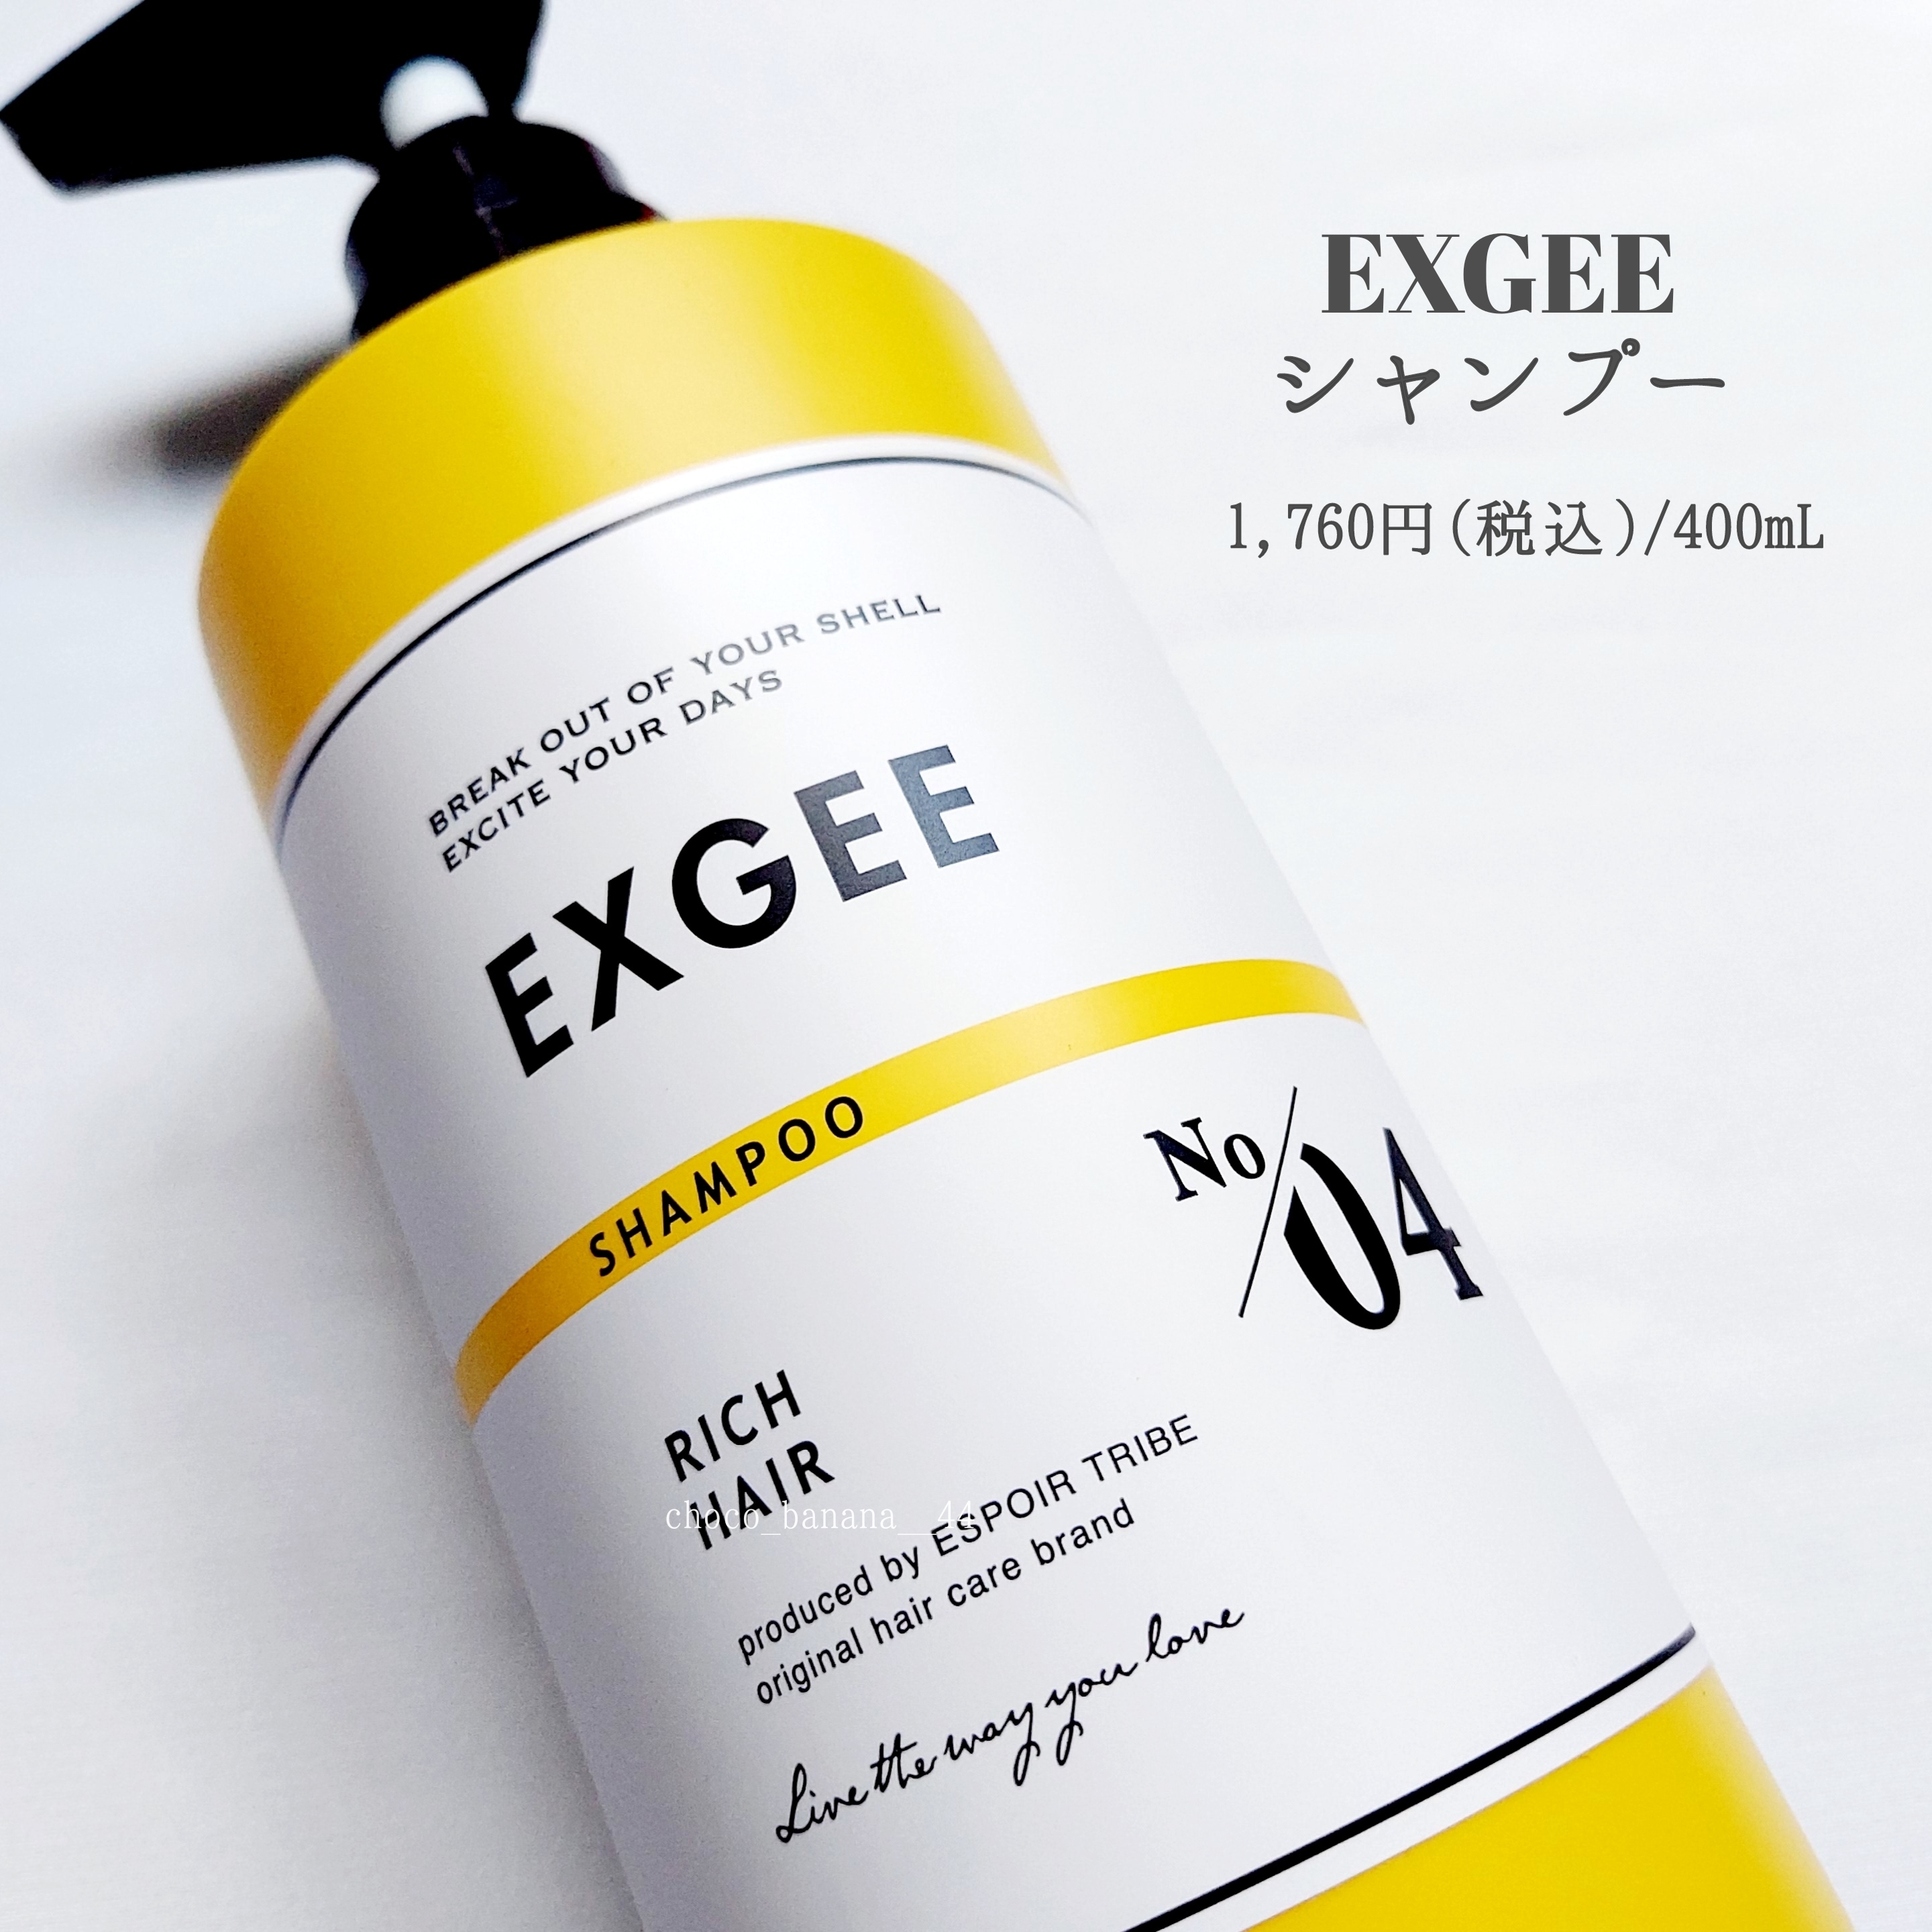 EXGEE
EXGEEシャンプー／EXGEEトリートメントを使ったししさんのクチコミ画像2